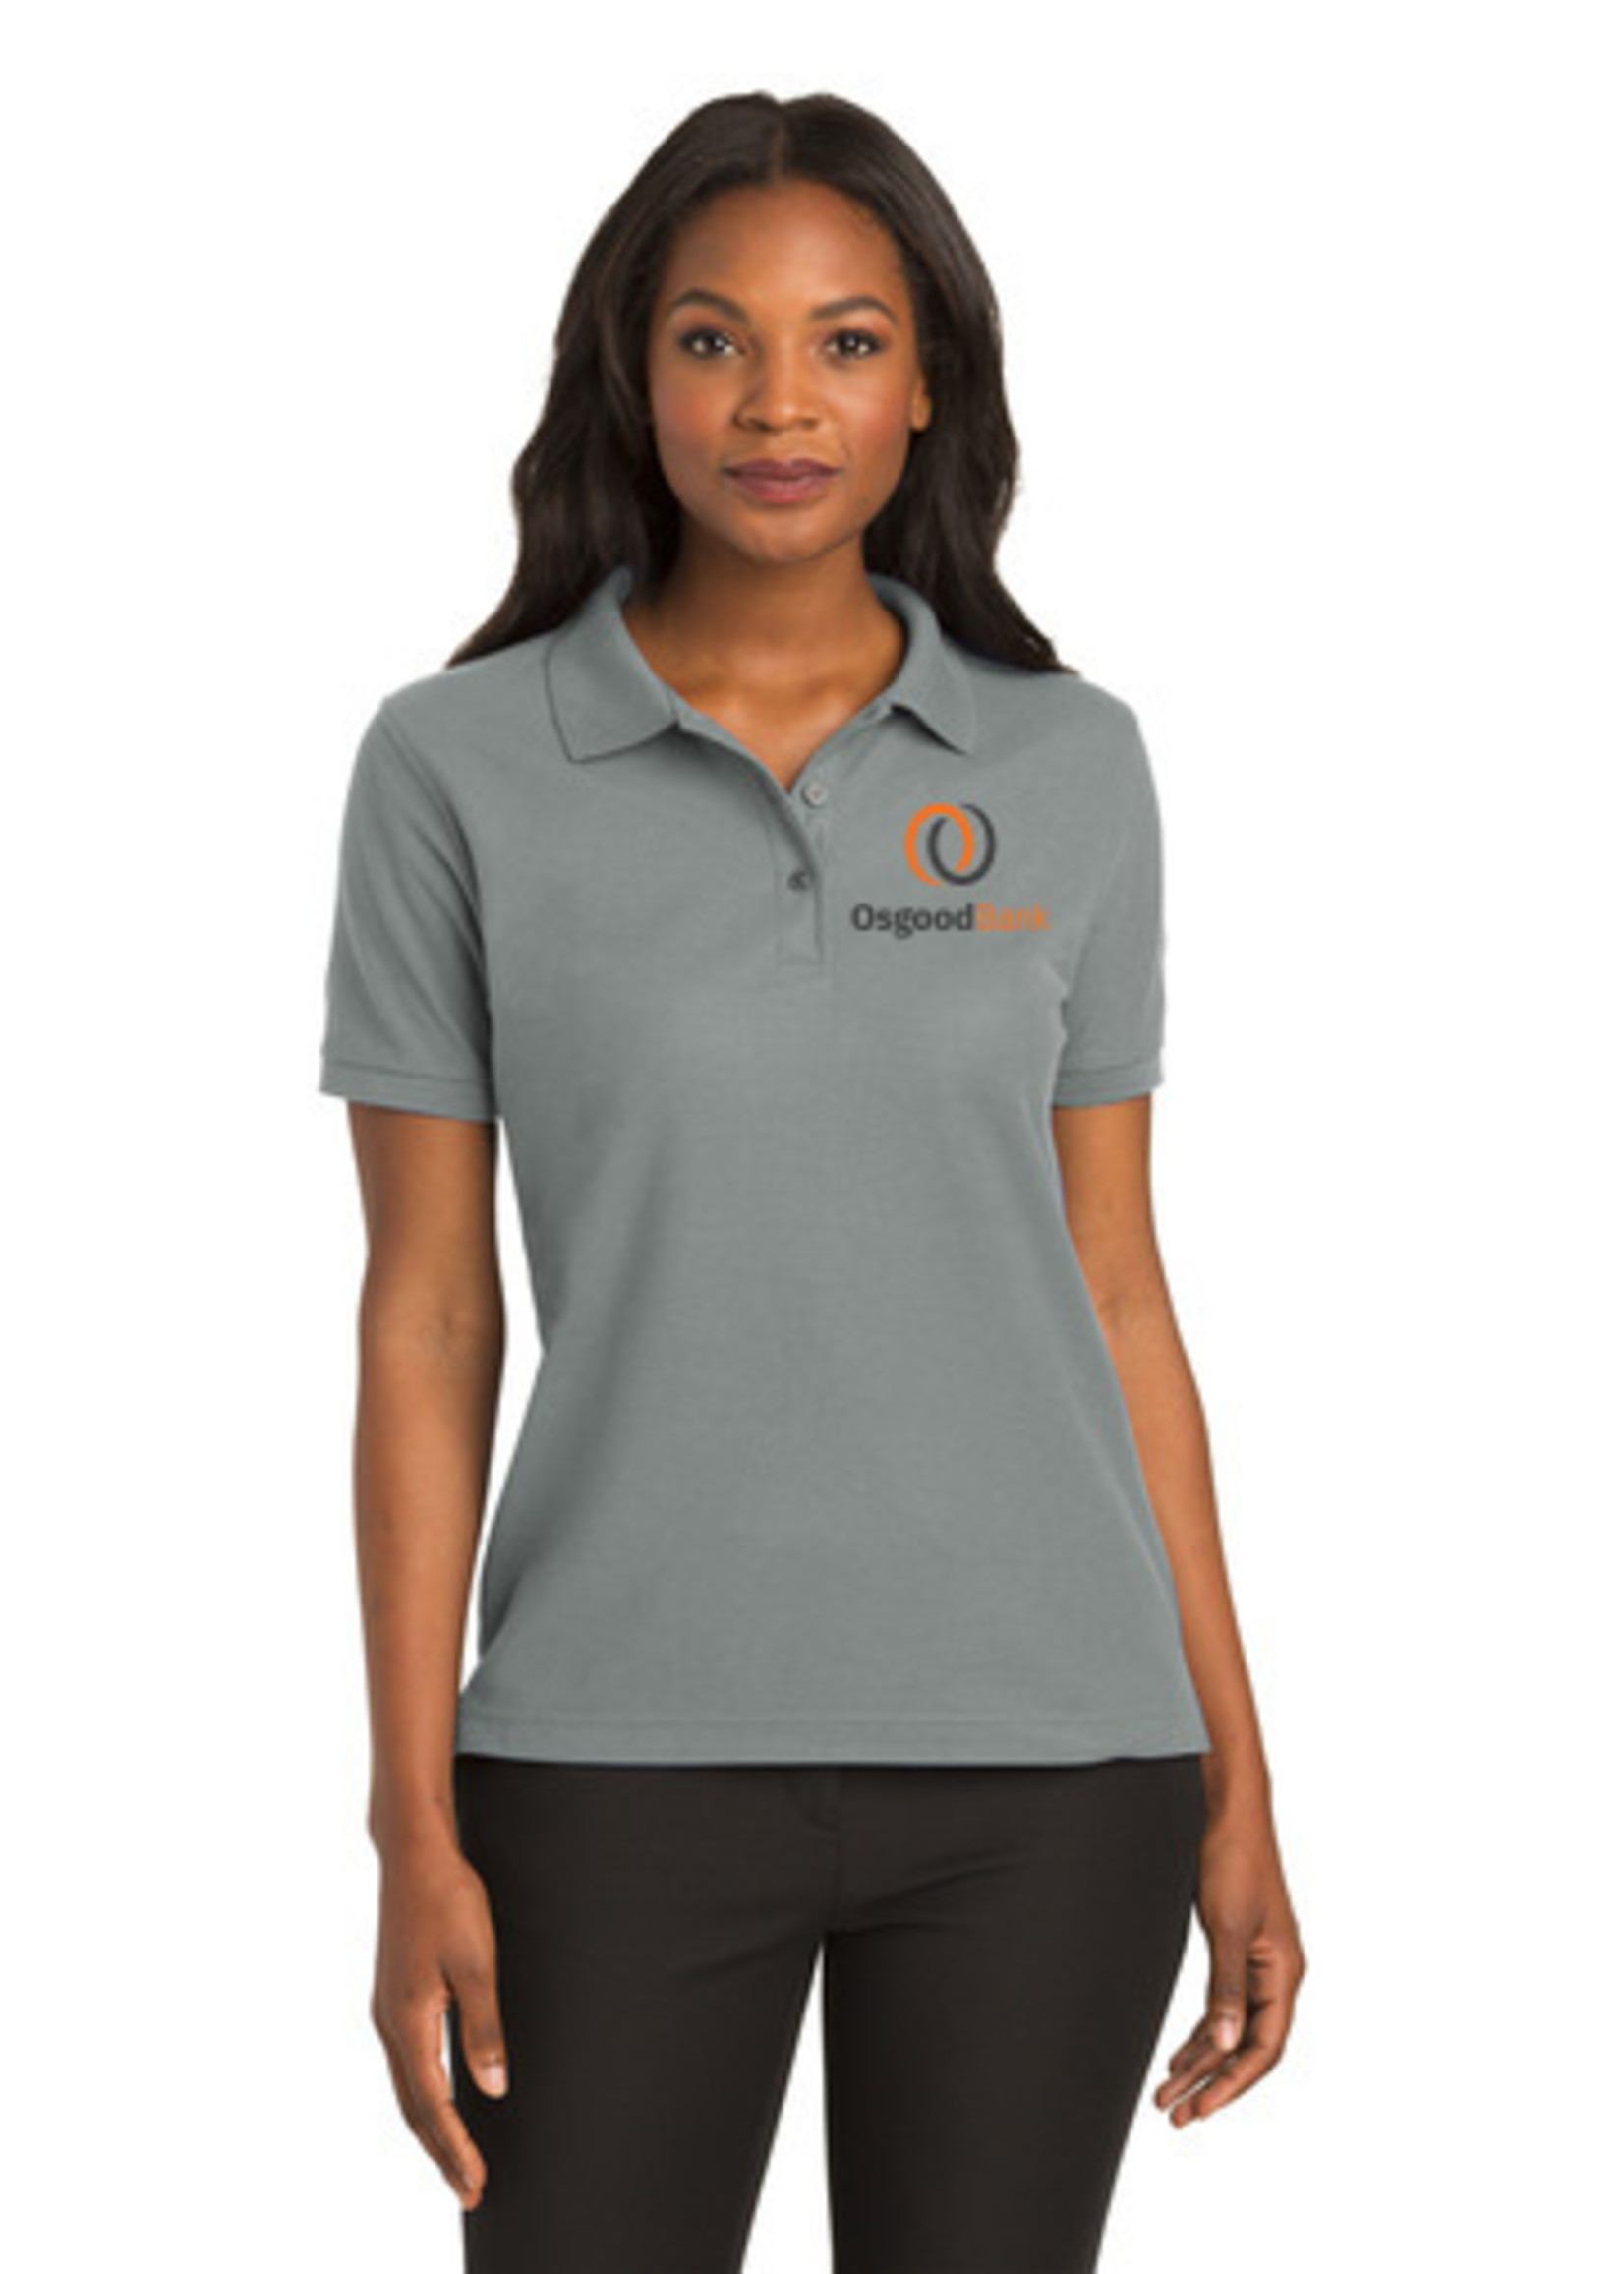 Port Authority OSGOOD BANK Ladies Silk Touch Polo L500